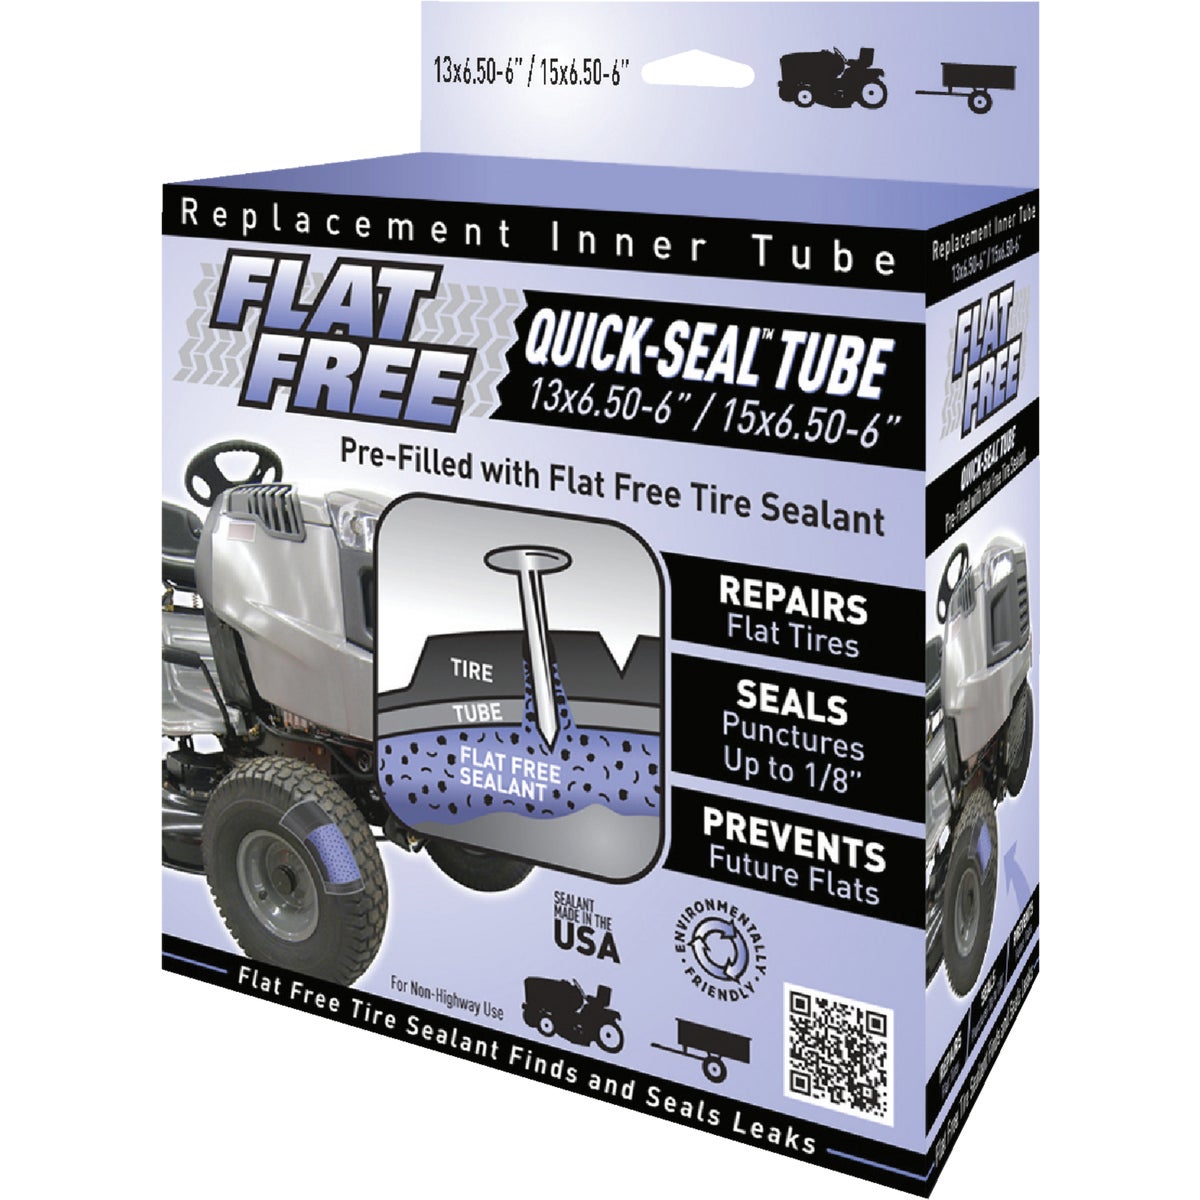 Item 801308, Quick-Seal tubes come pre-filled with Flat Free Tire Sealant.